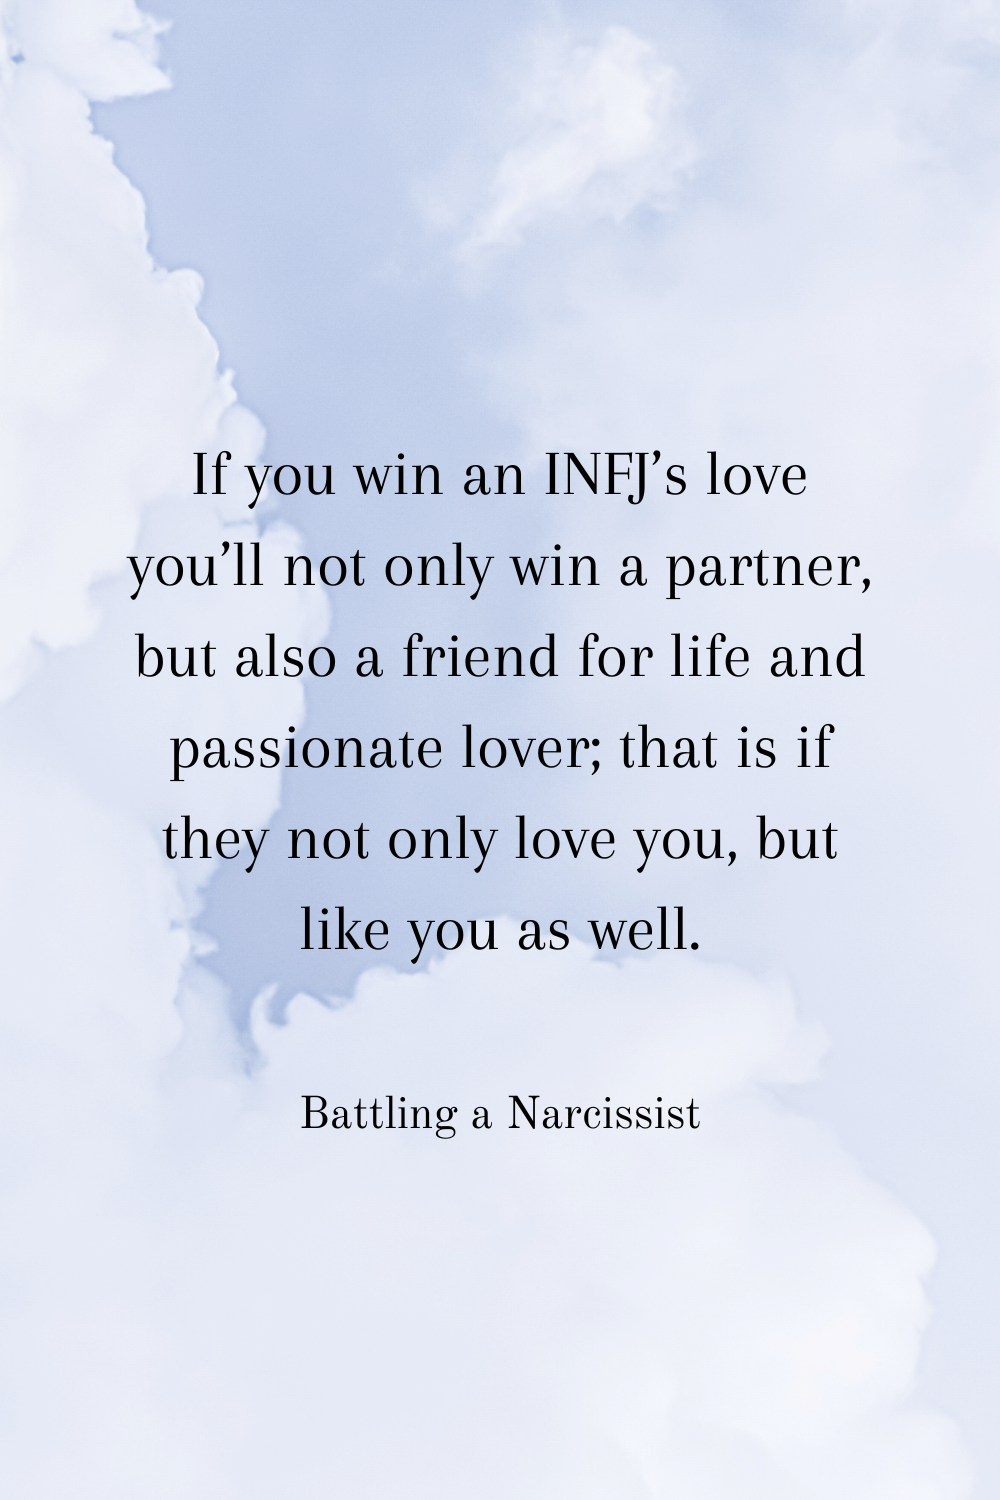 The Love of an INFJ